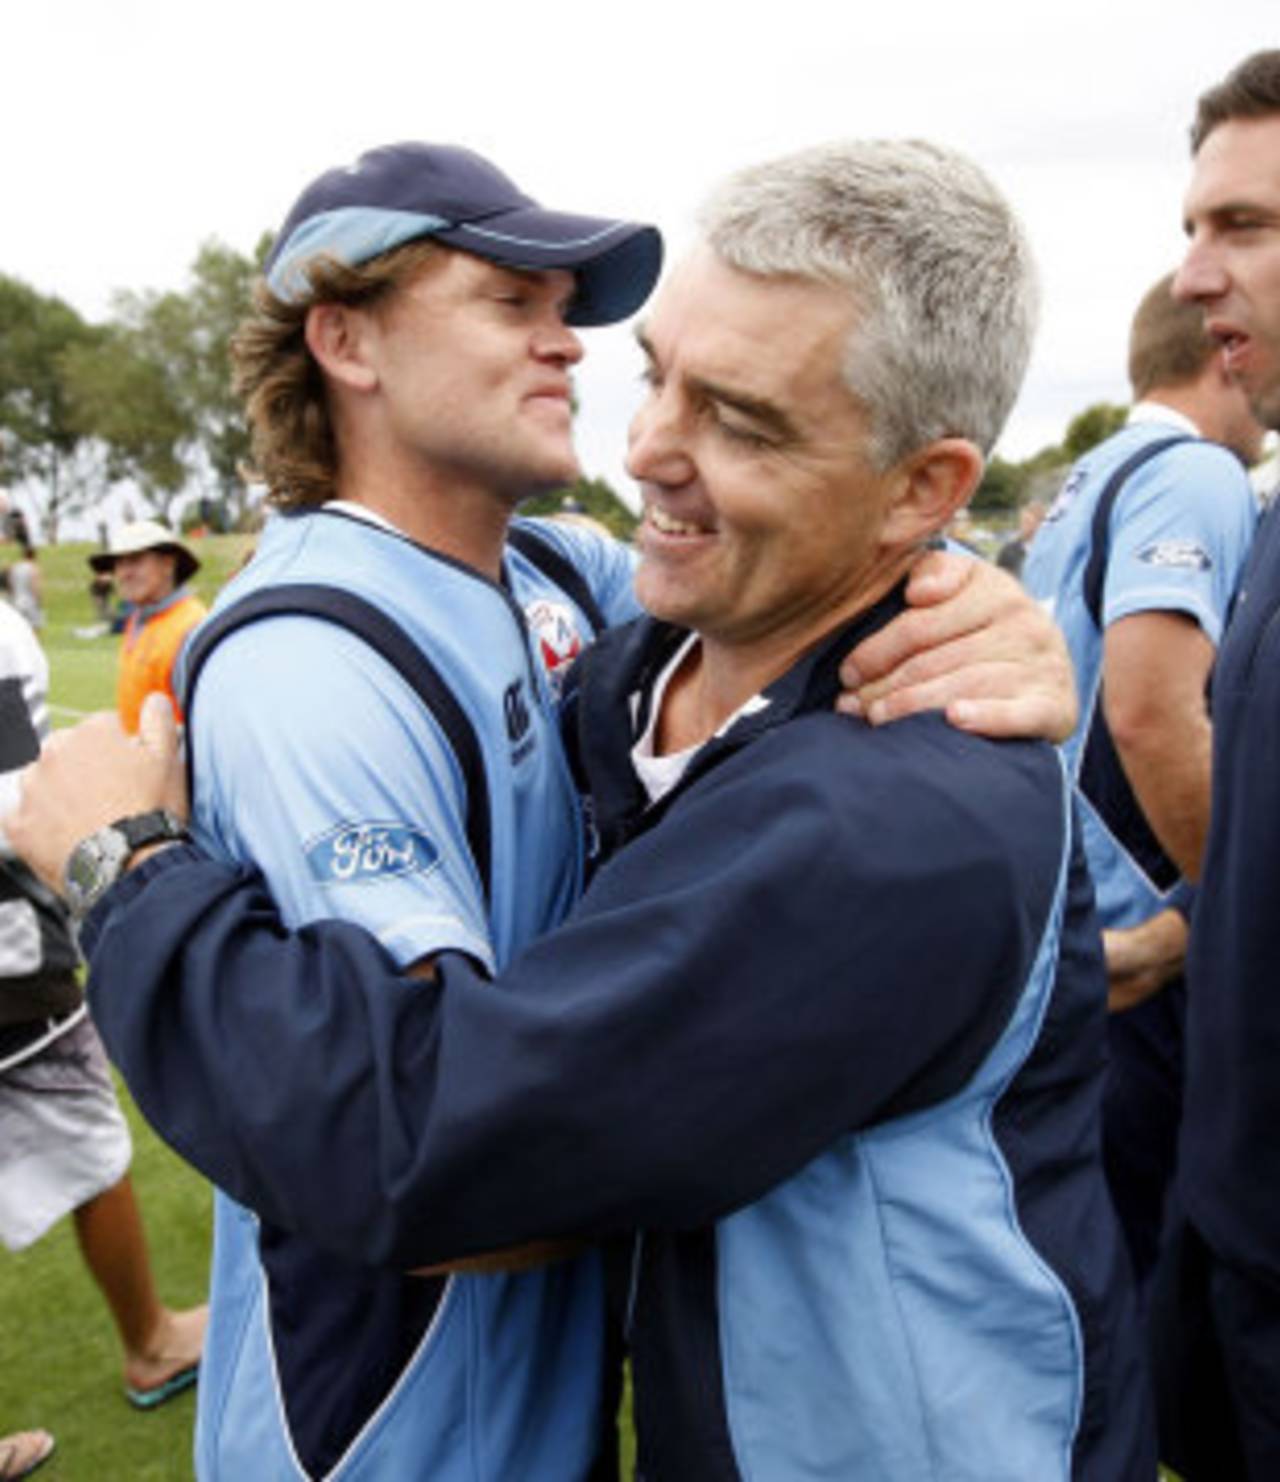 Lou Vincent hugs coach Paul Strang after Auckland's victory in the one-day final, Canterbury v Auckland, Christchurch, February 13, 2011